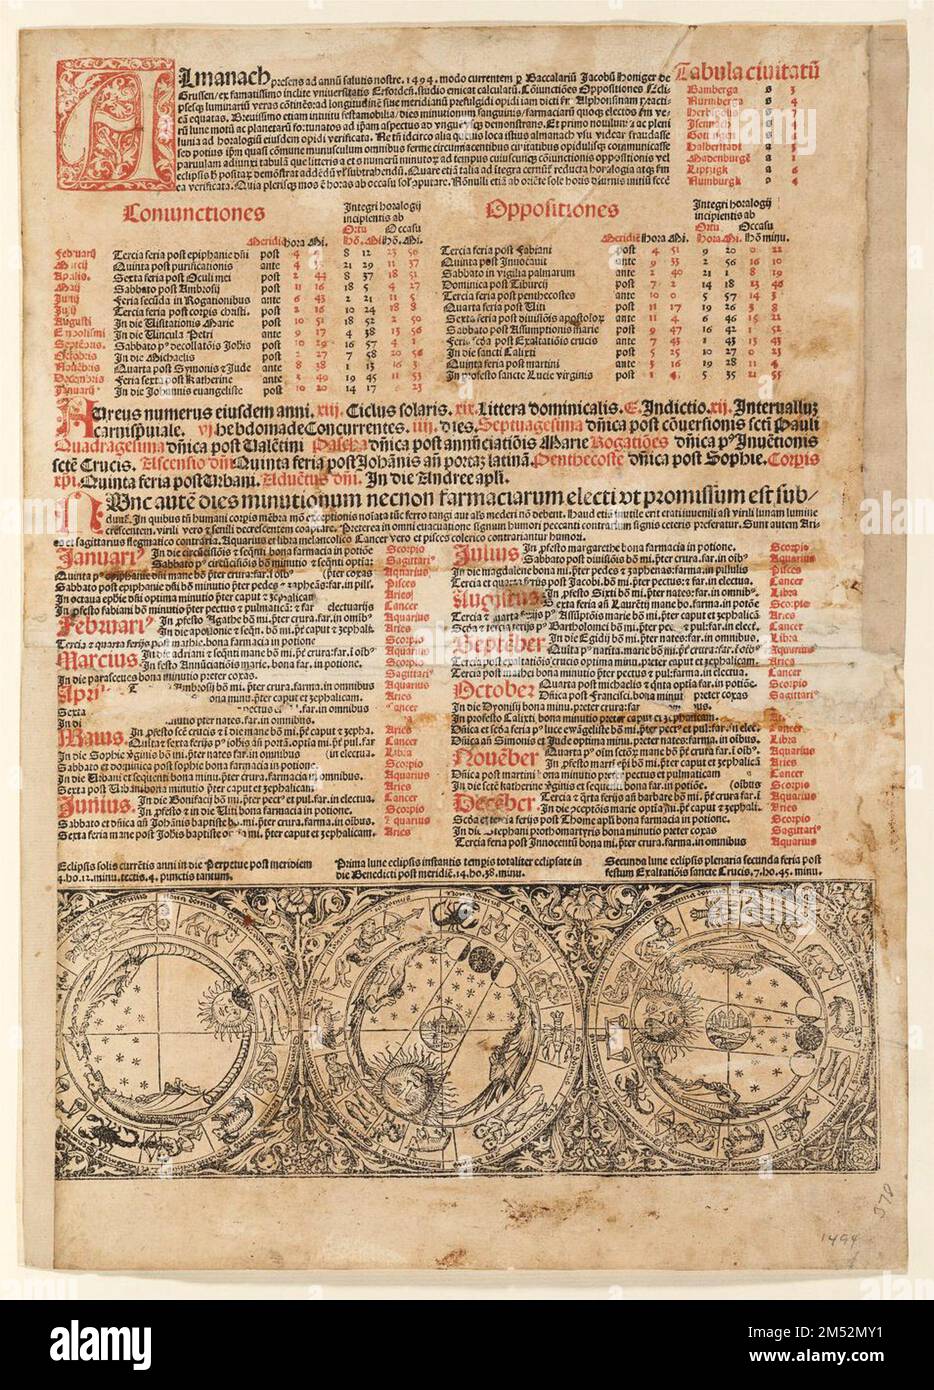 Almanacs were used to record the most propitious days and times for purging, bloodletting, and pharmaceutical manufacture according to astrological and astronomical events. This specimen for the city of Erfurt in 1494 includes woodcuts depicting solar and lunar eclipses. Stock Photo